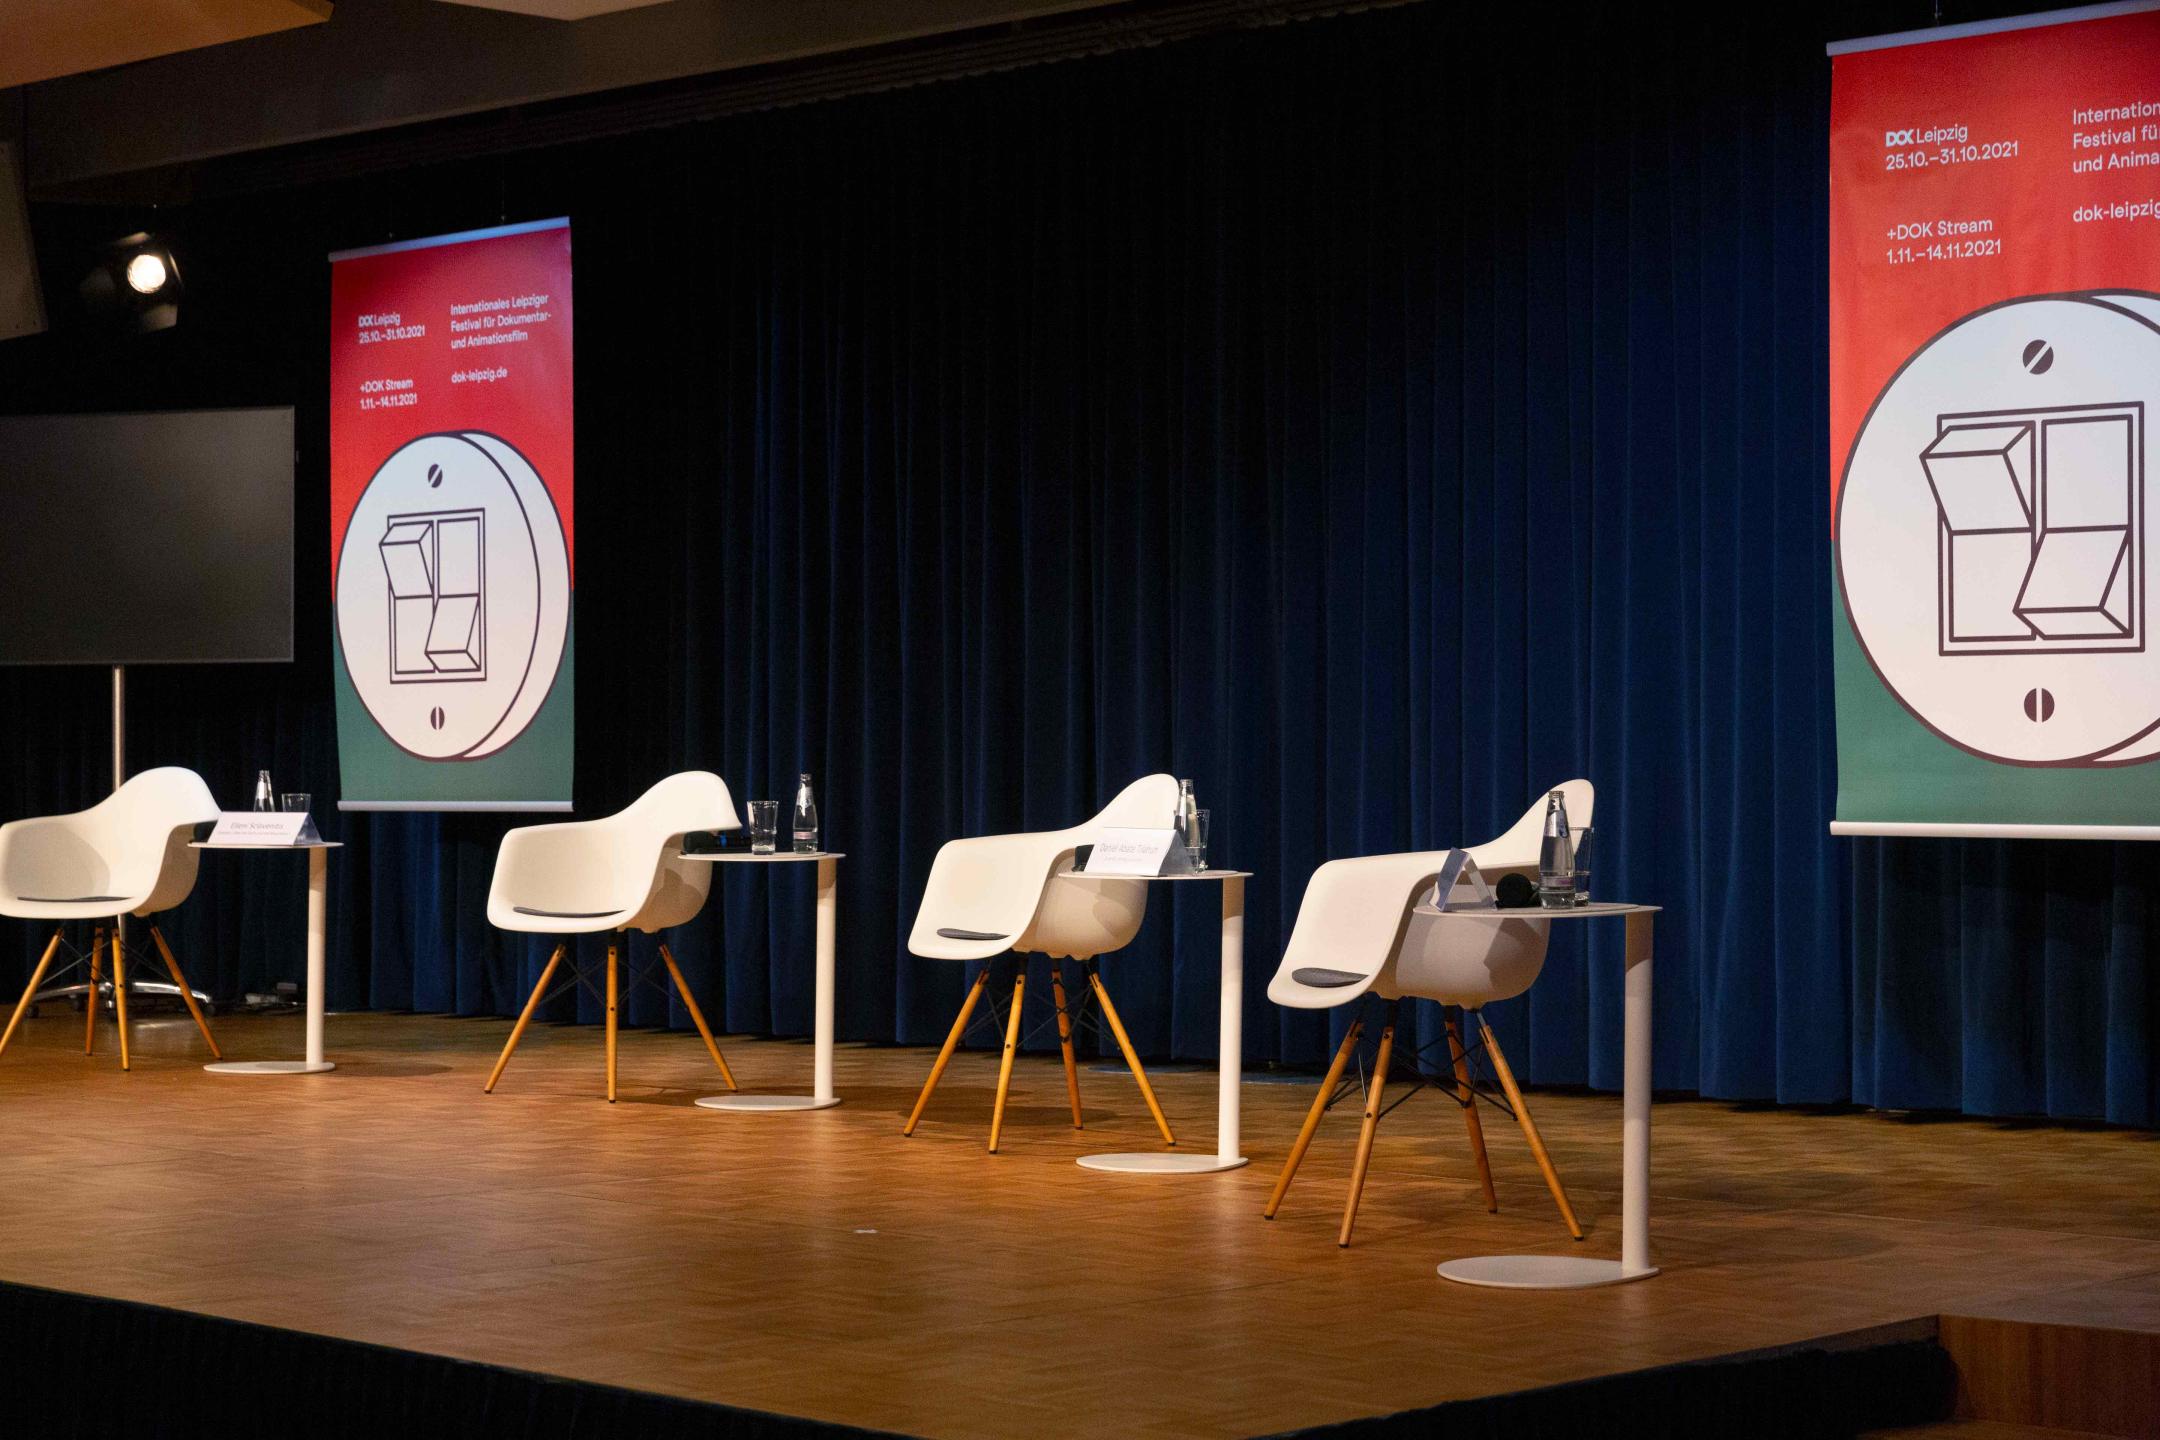 A podium prepared for a panel: Four empty white chairs with small tables in between and a DOK Leipzig festival poster in the background .